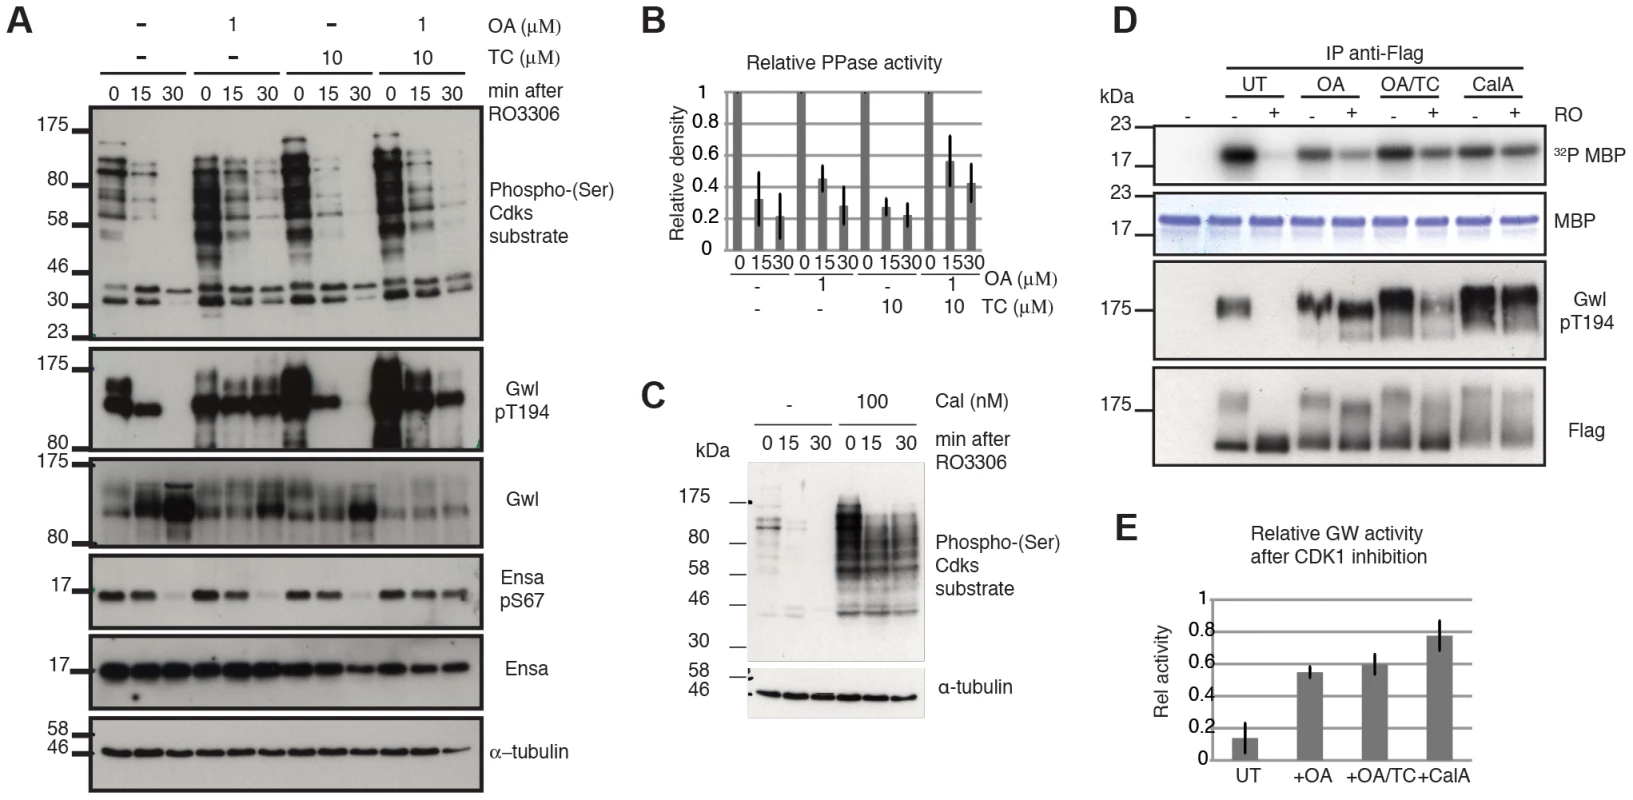 Characterizing Gwl, Ensa/ARPP19 and SP dephosphorylation during mitotic exit.